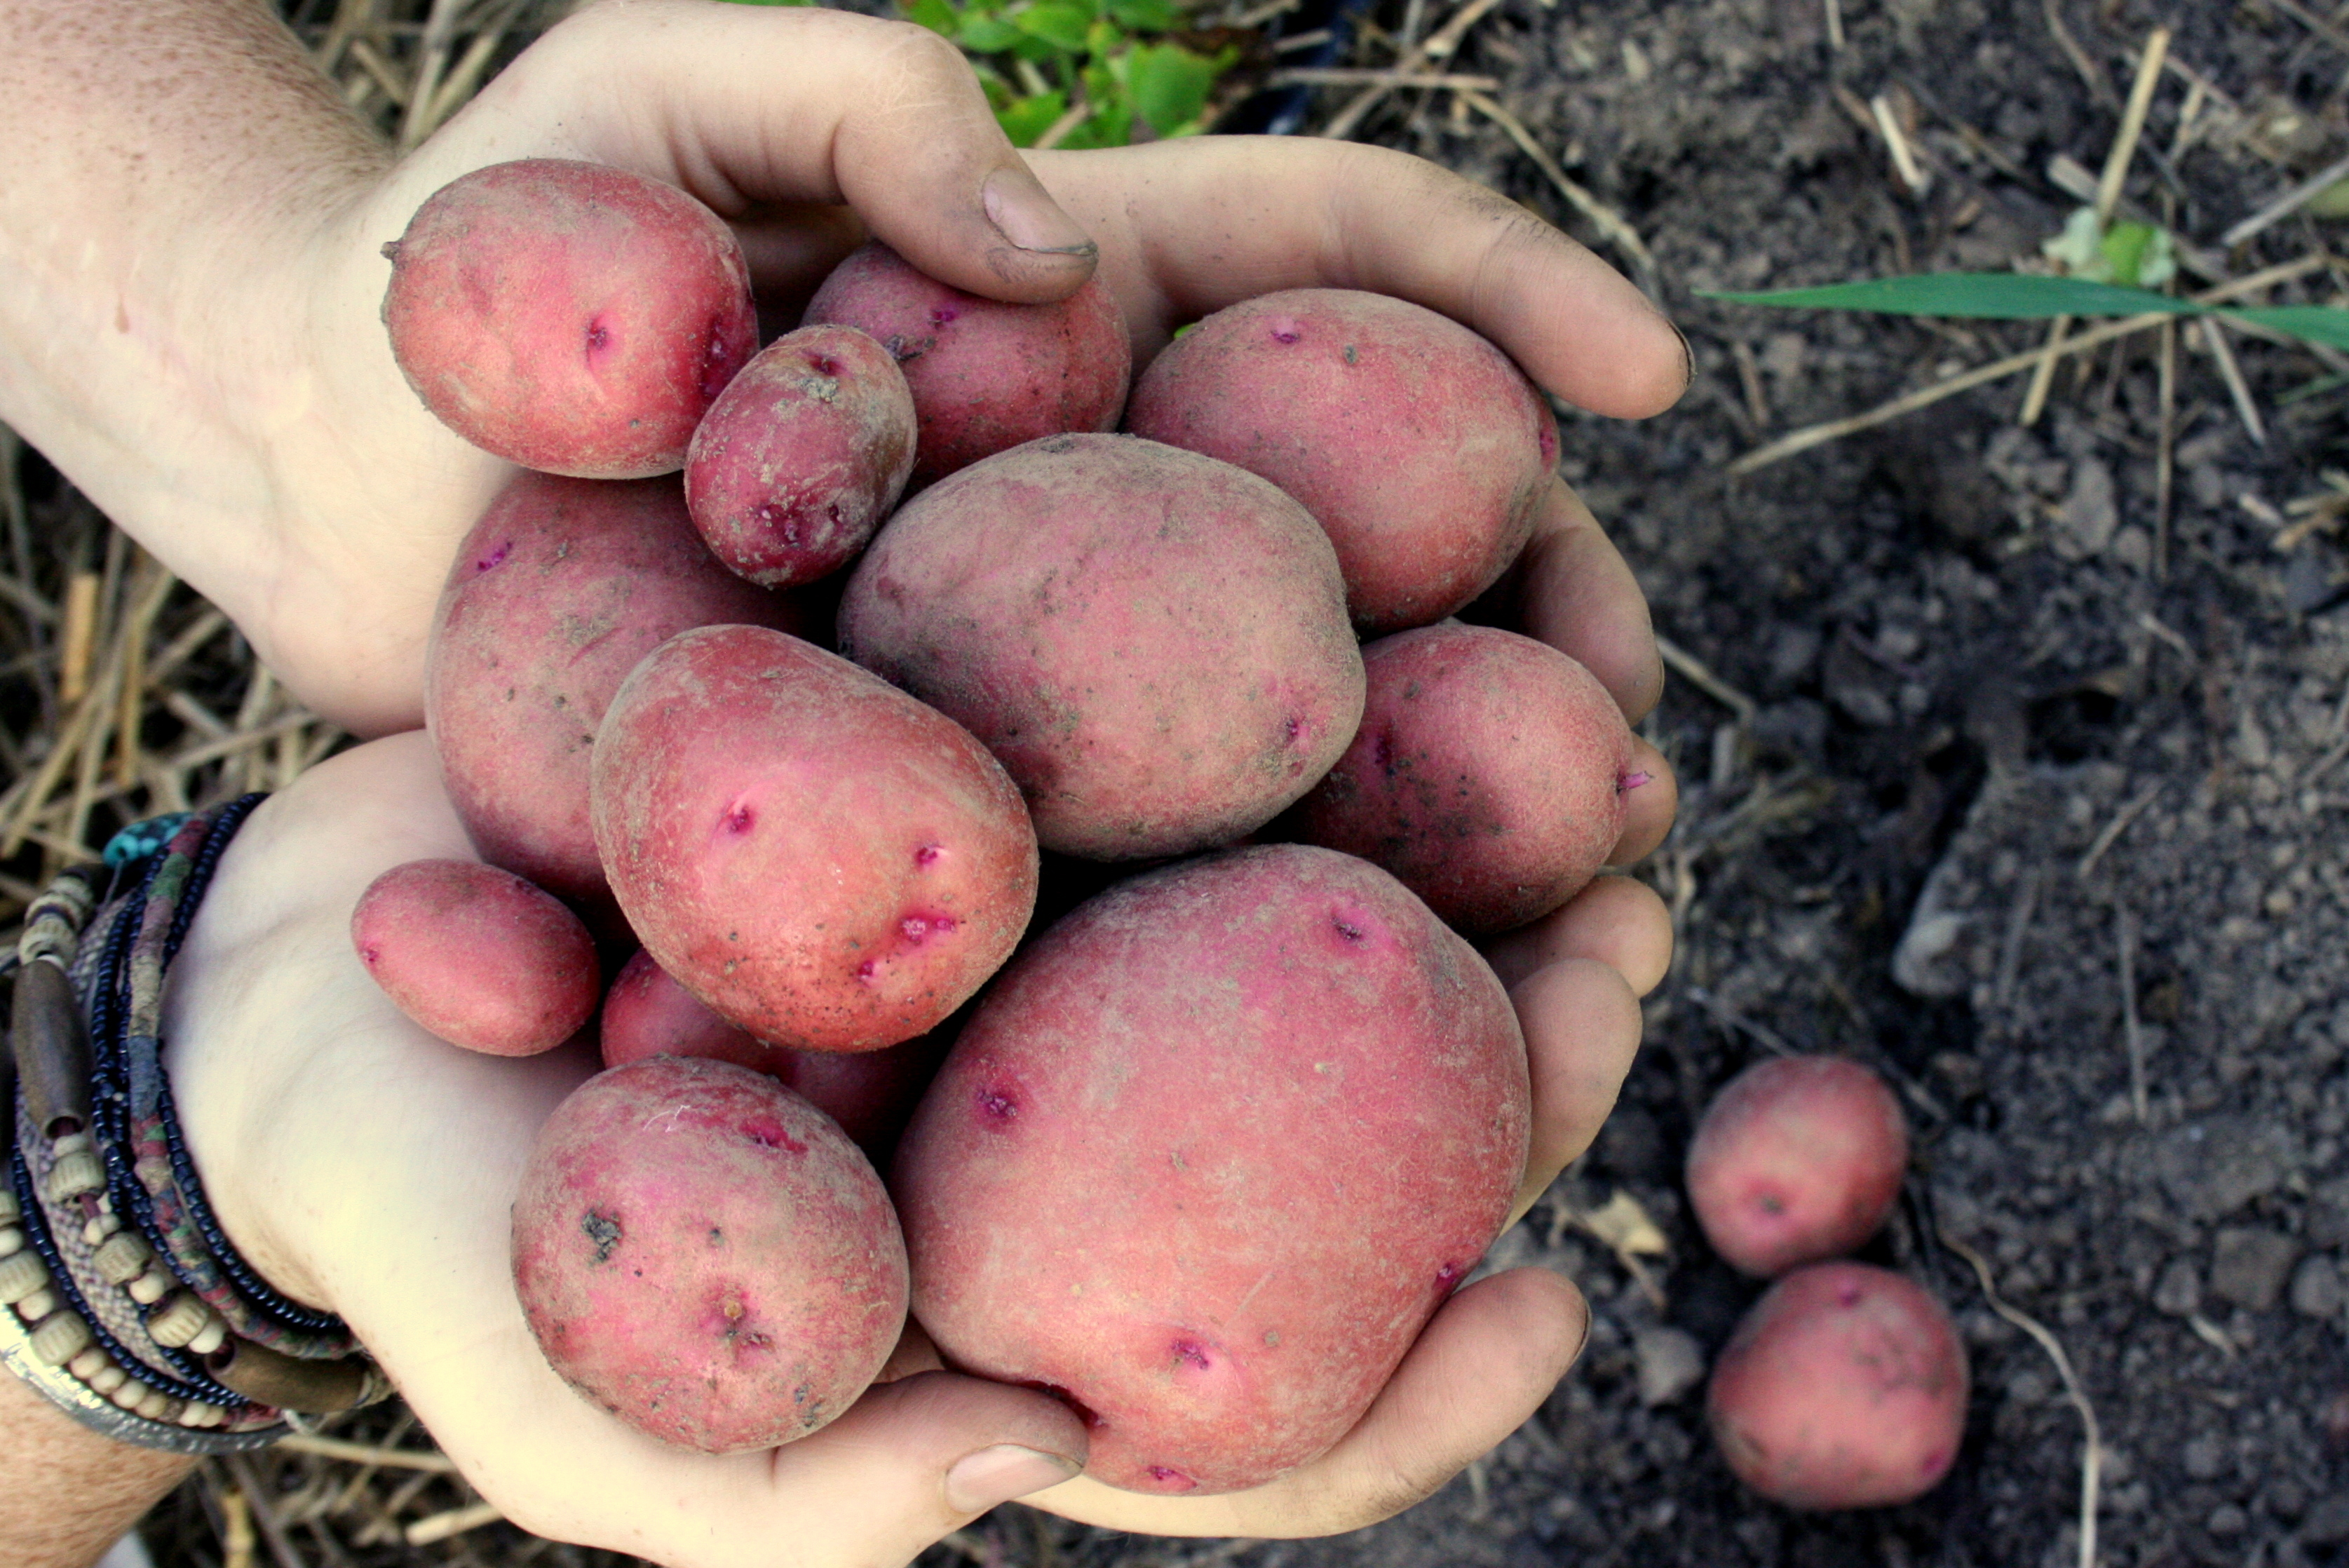 Are Red Potatoes Healthy?